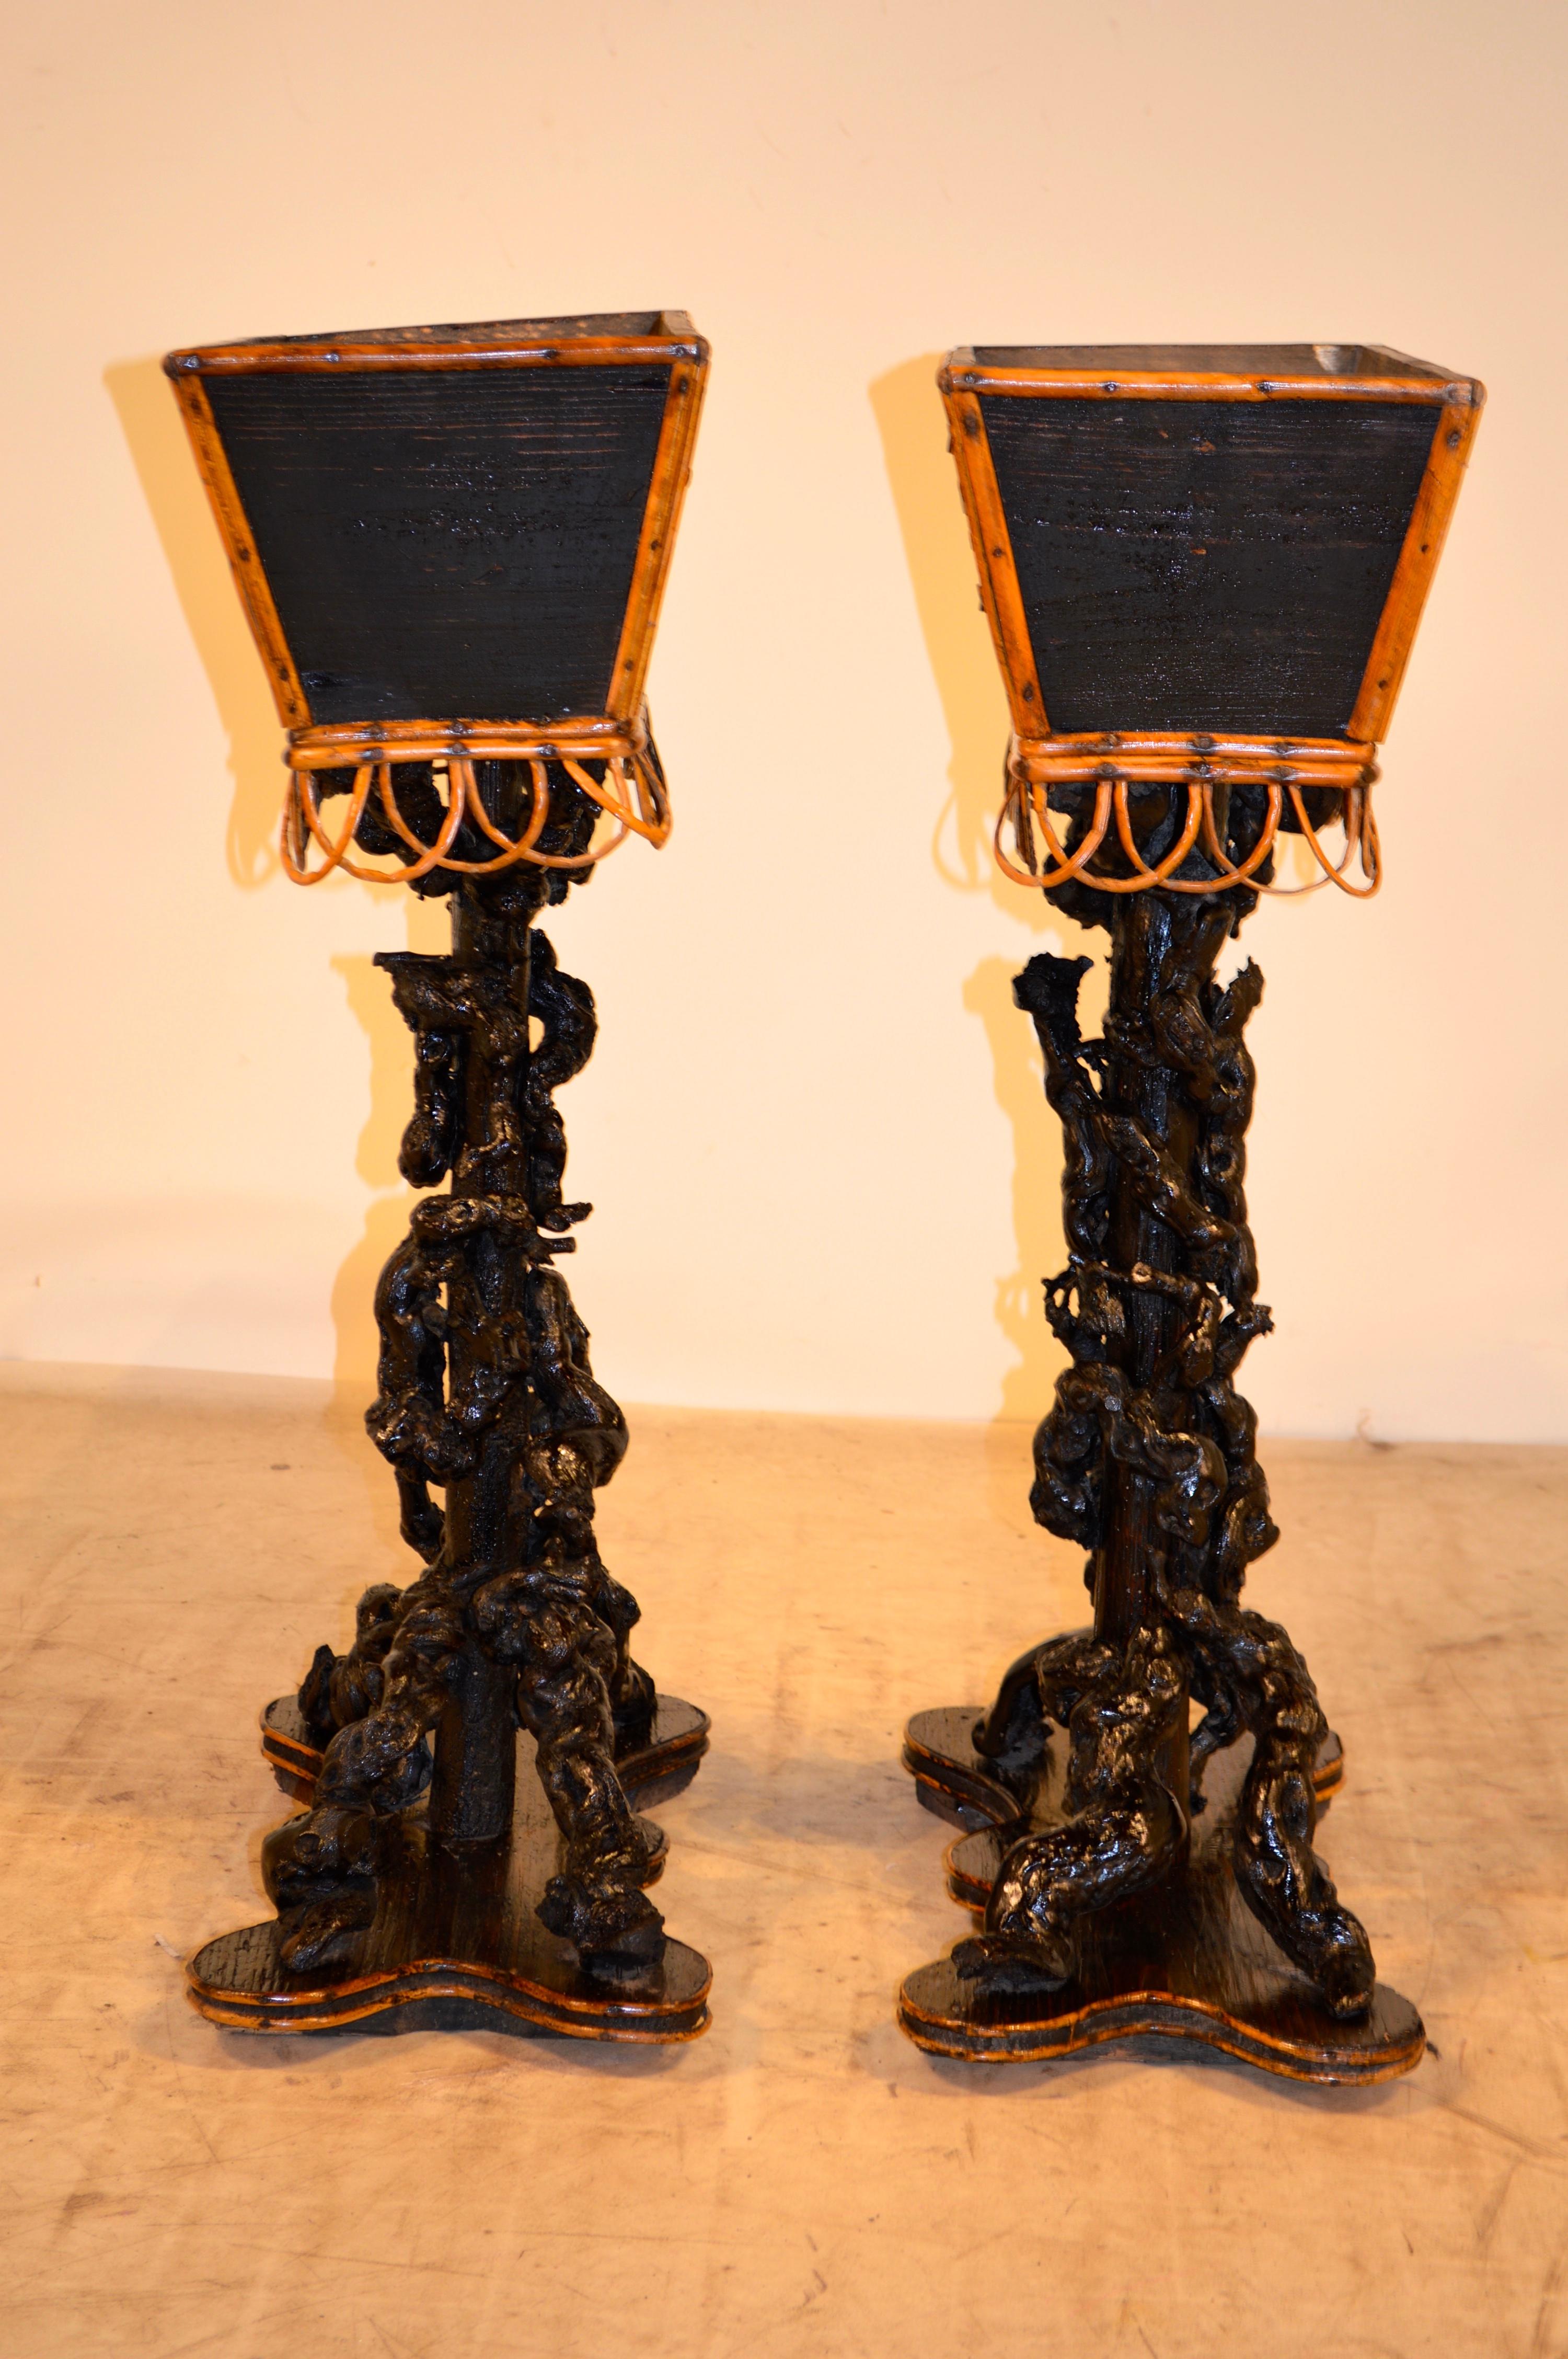 19th century pair of French twig planters from the Ardeche Mountain area of France. They have with pine planter boxes decorated with pinecones and twig ornamentation. The bases are made of pine with twisted twig design supports, resting on